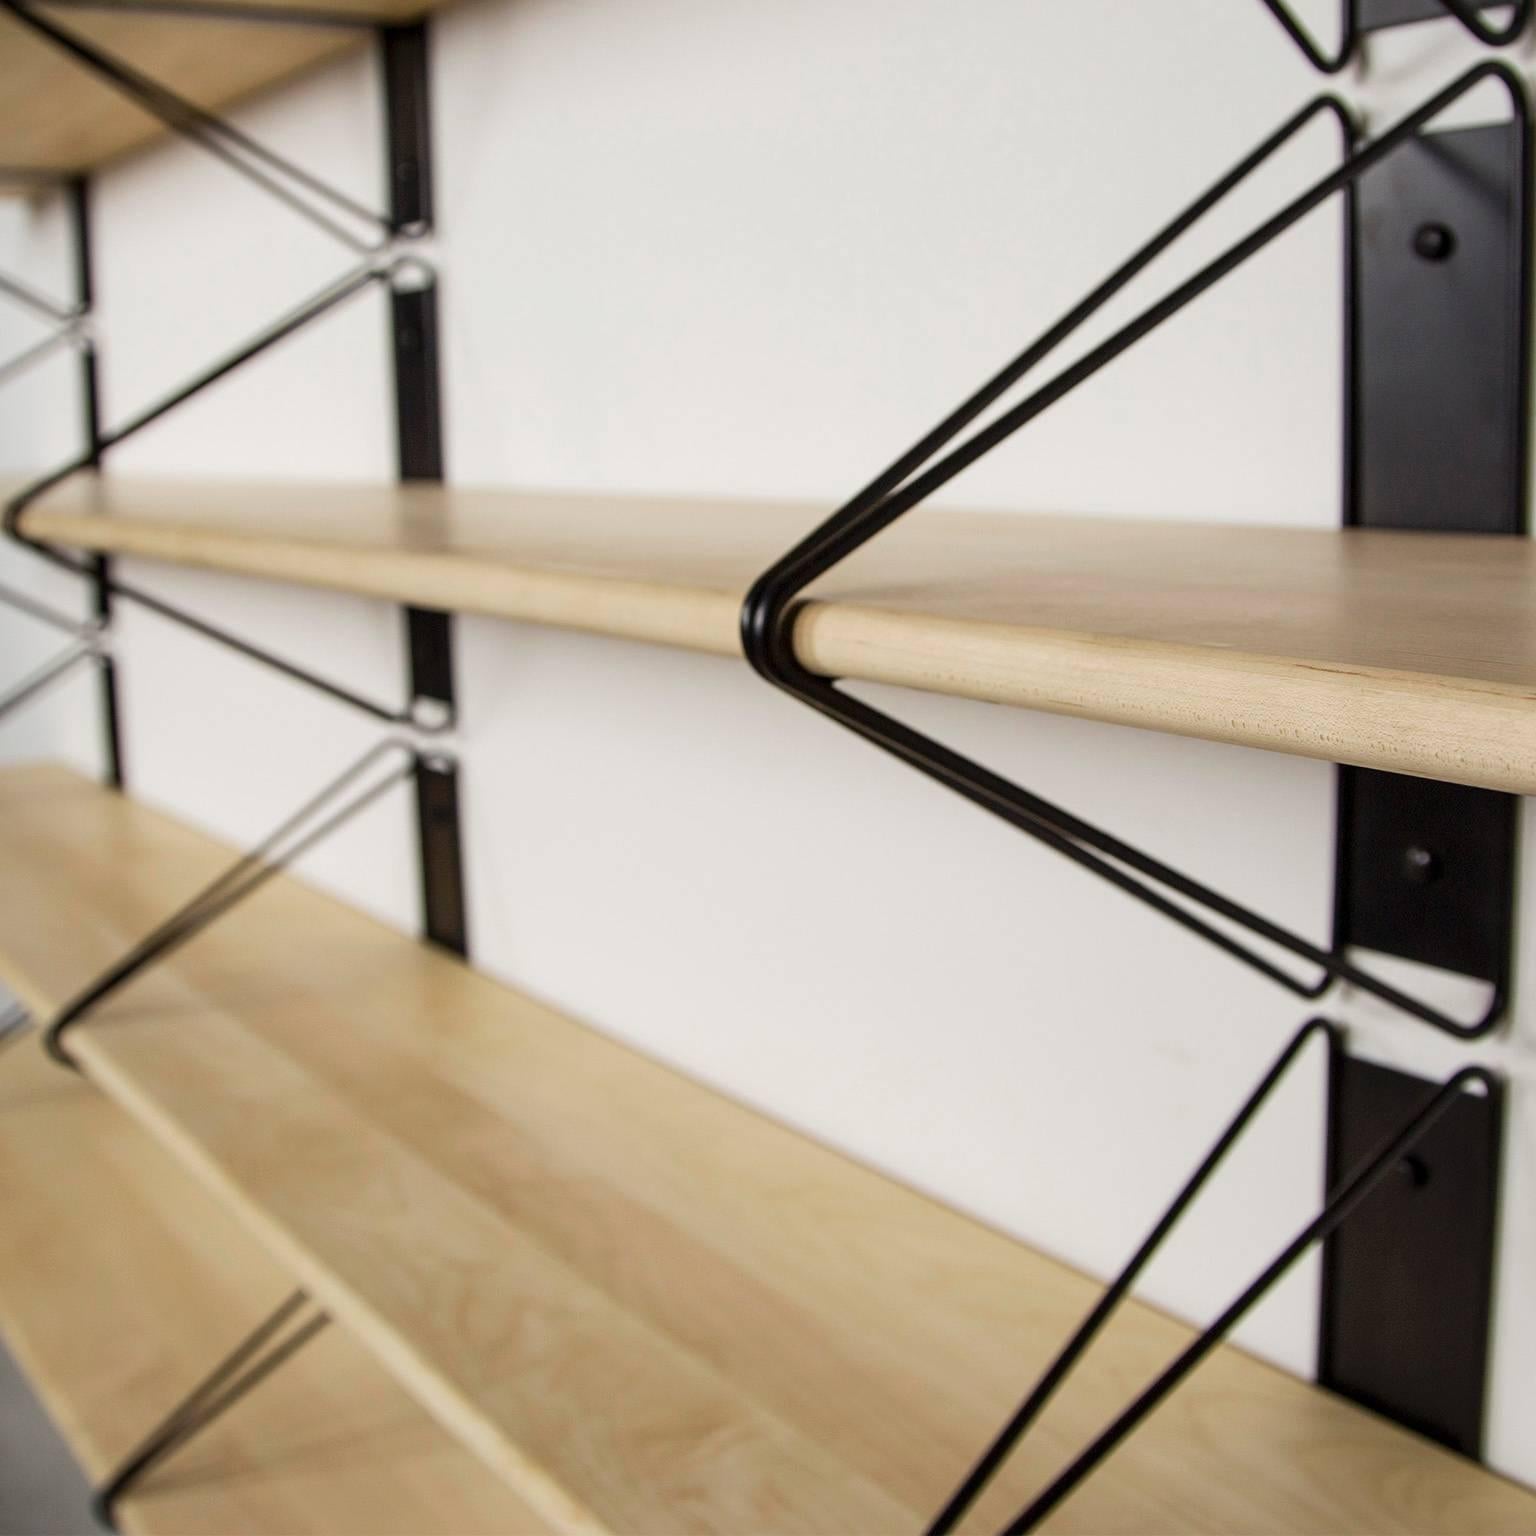 Contemporary Set of 4 Strut Shelves from Souda, 84in, Black and Maple, Made to Order For Sale